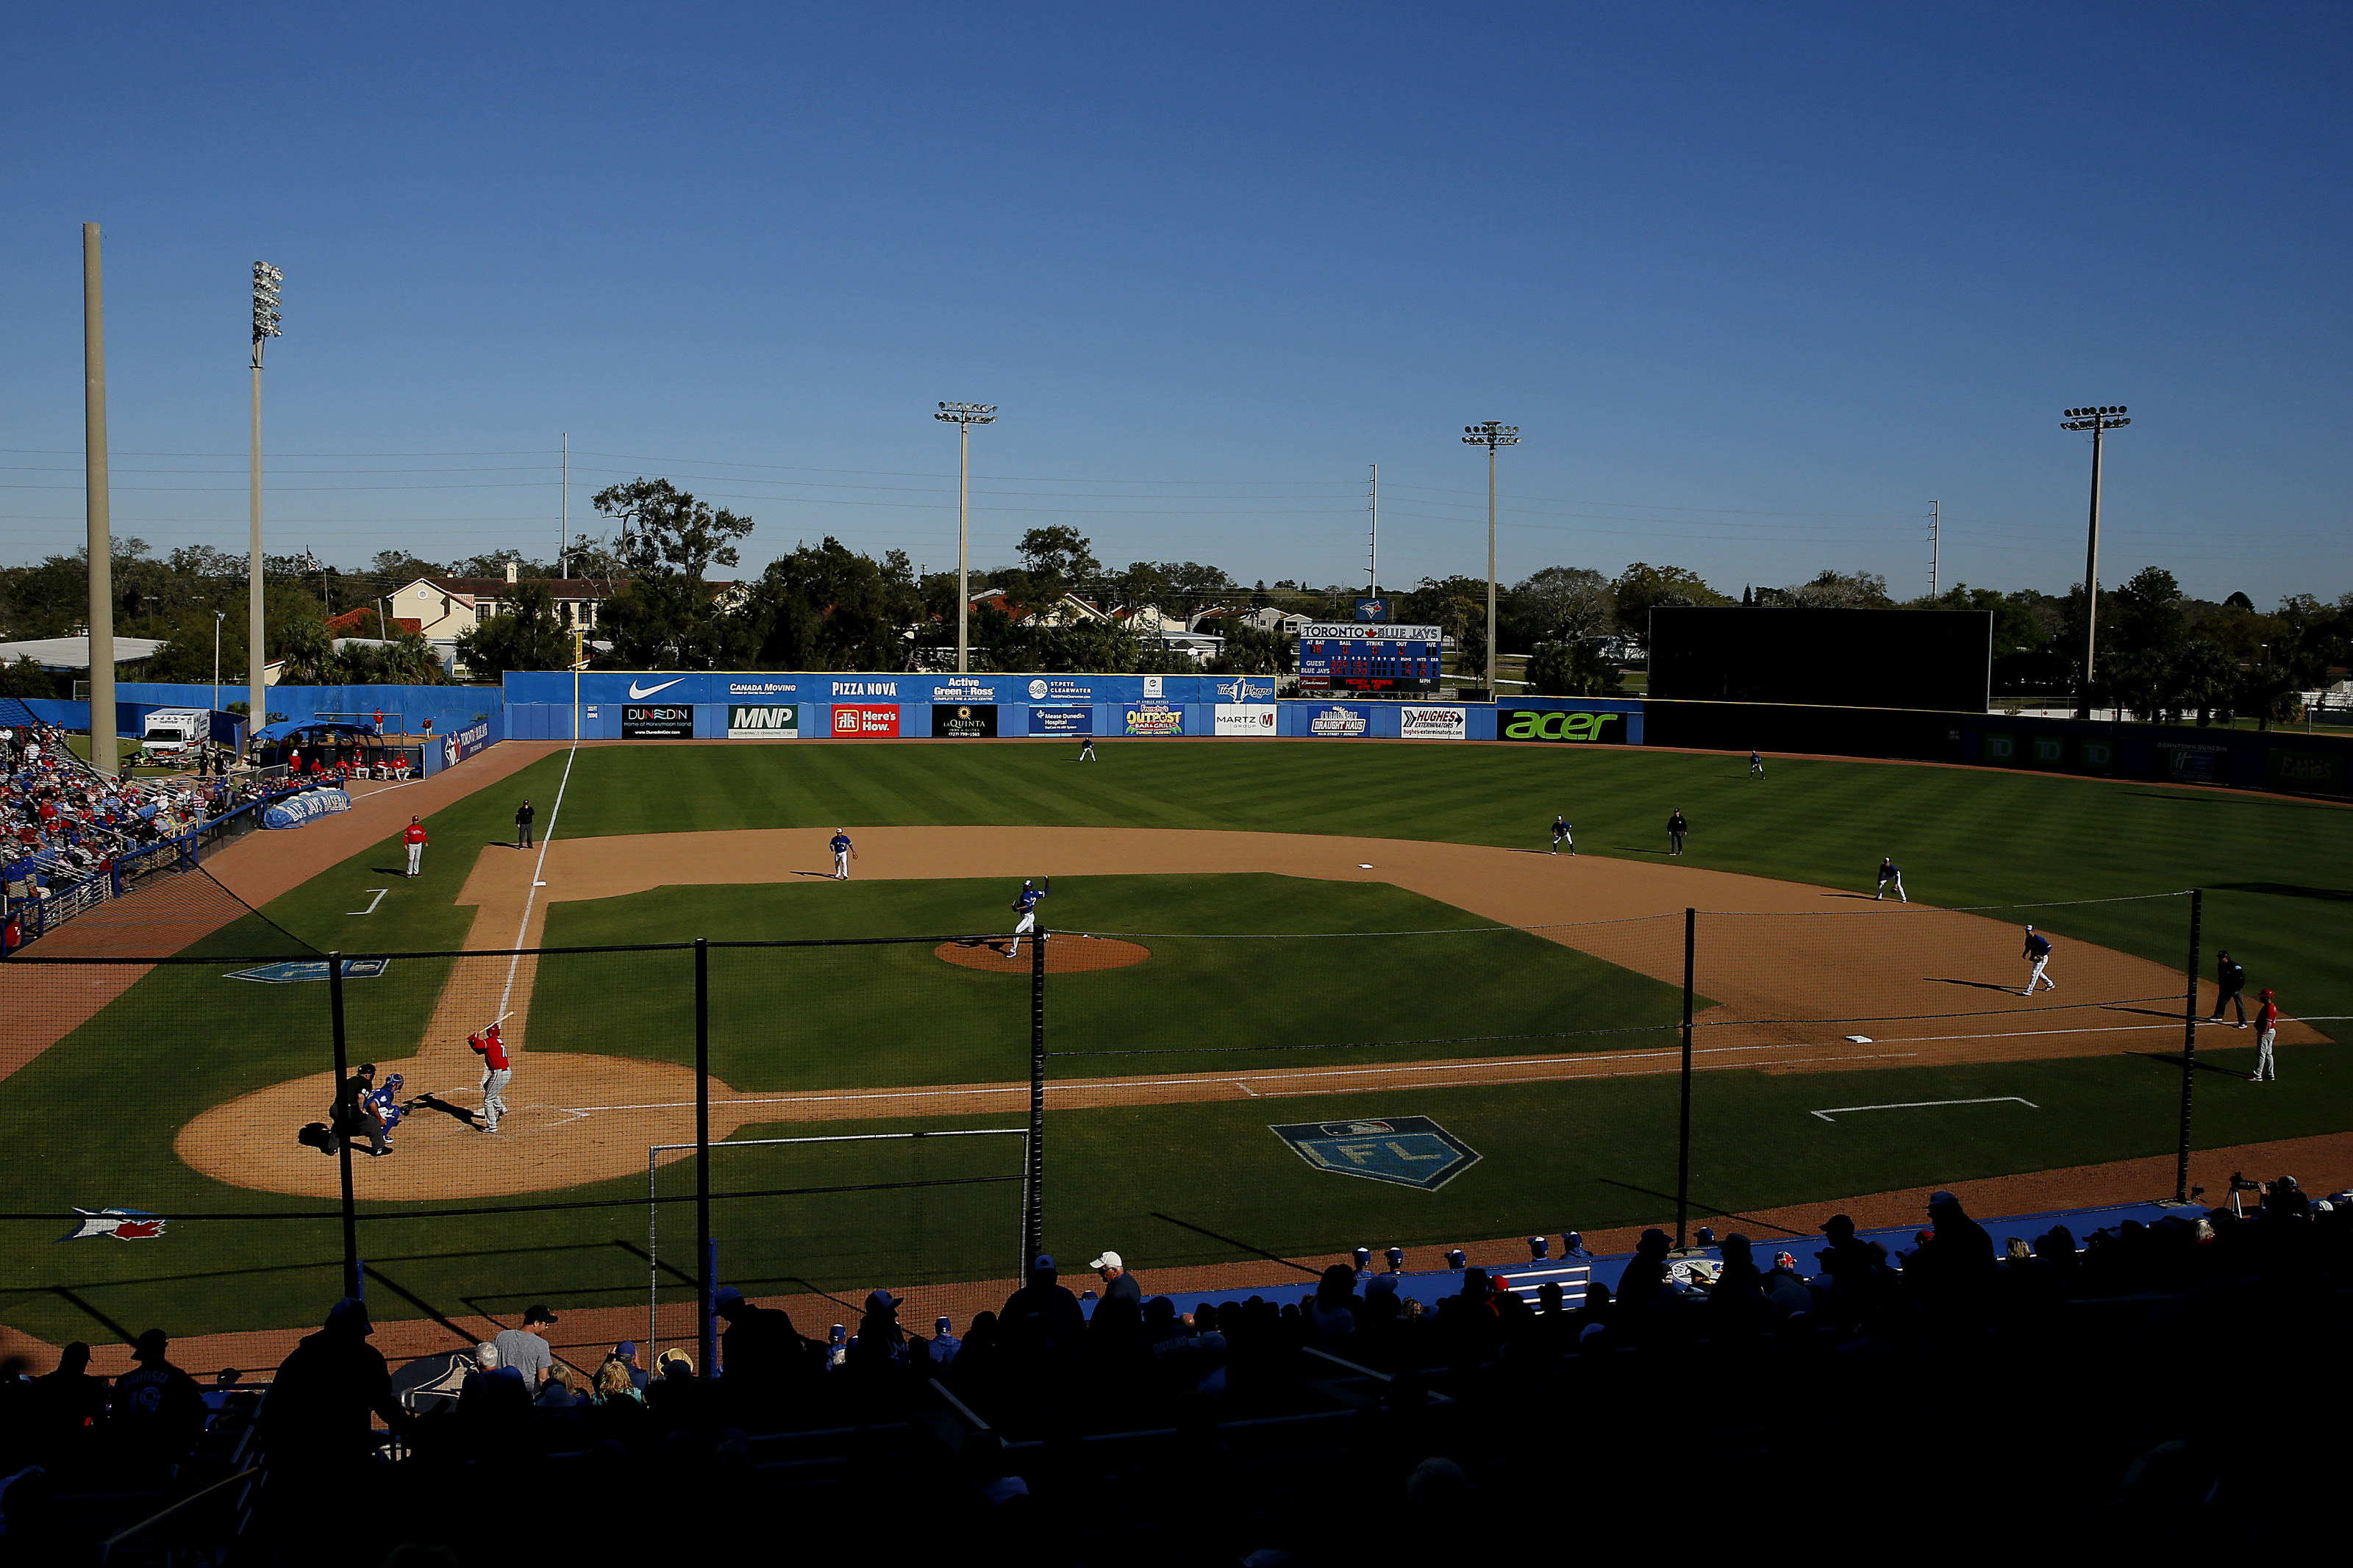 Blue Jays: Player development complex and stadium coming along nicely